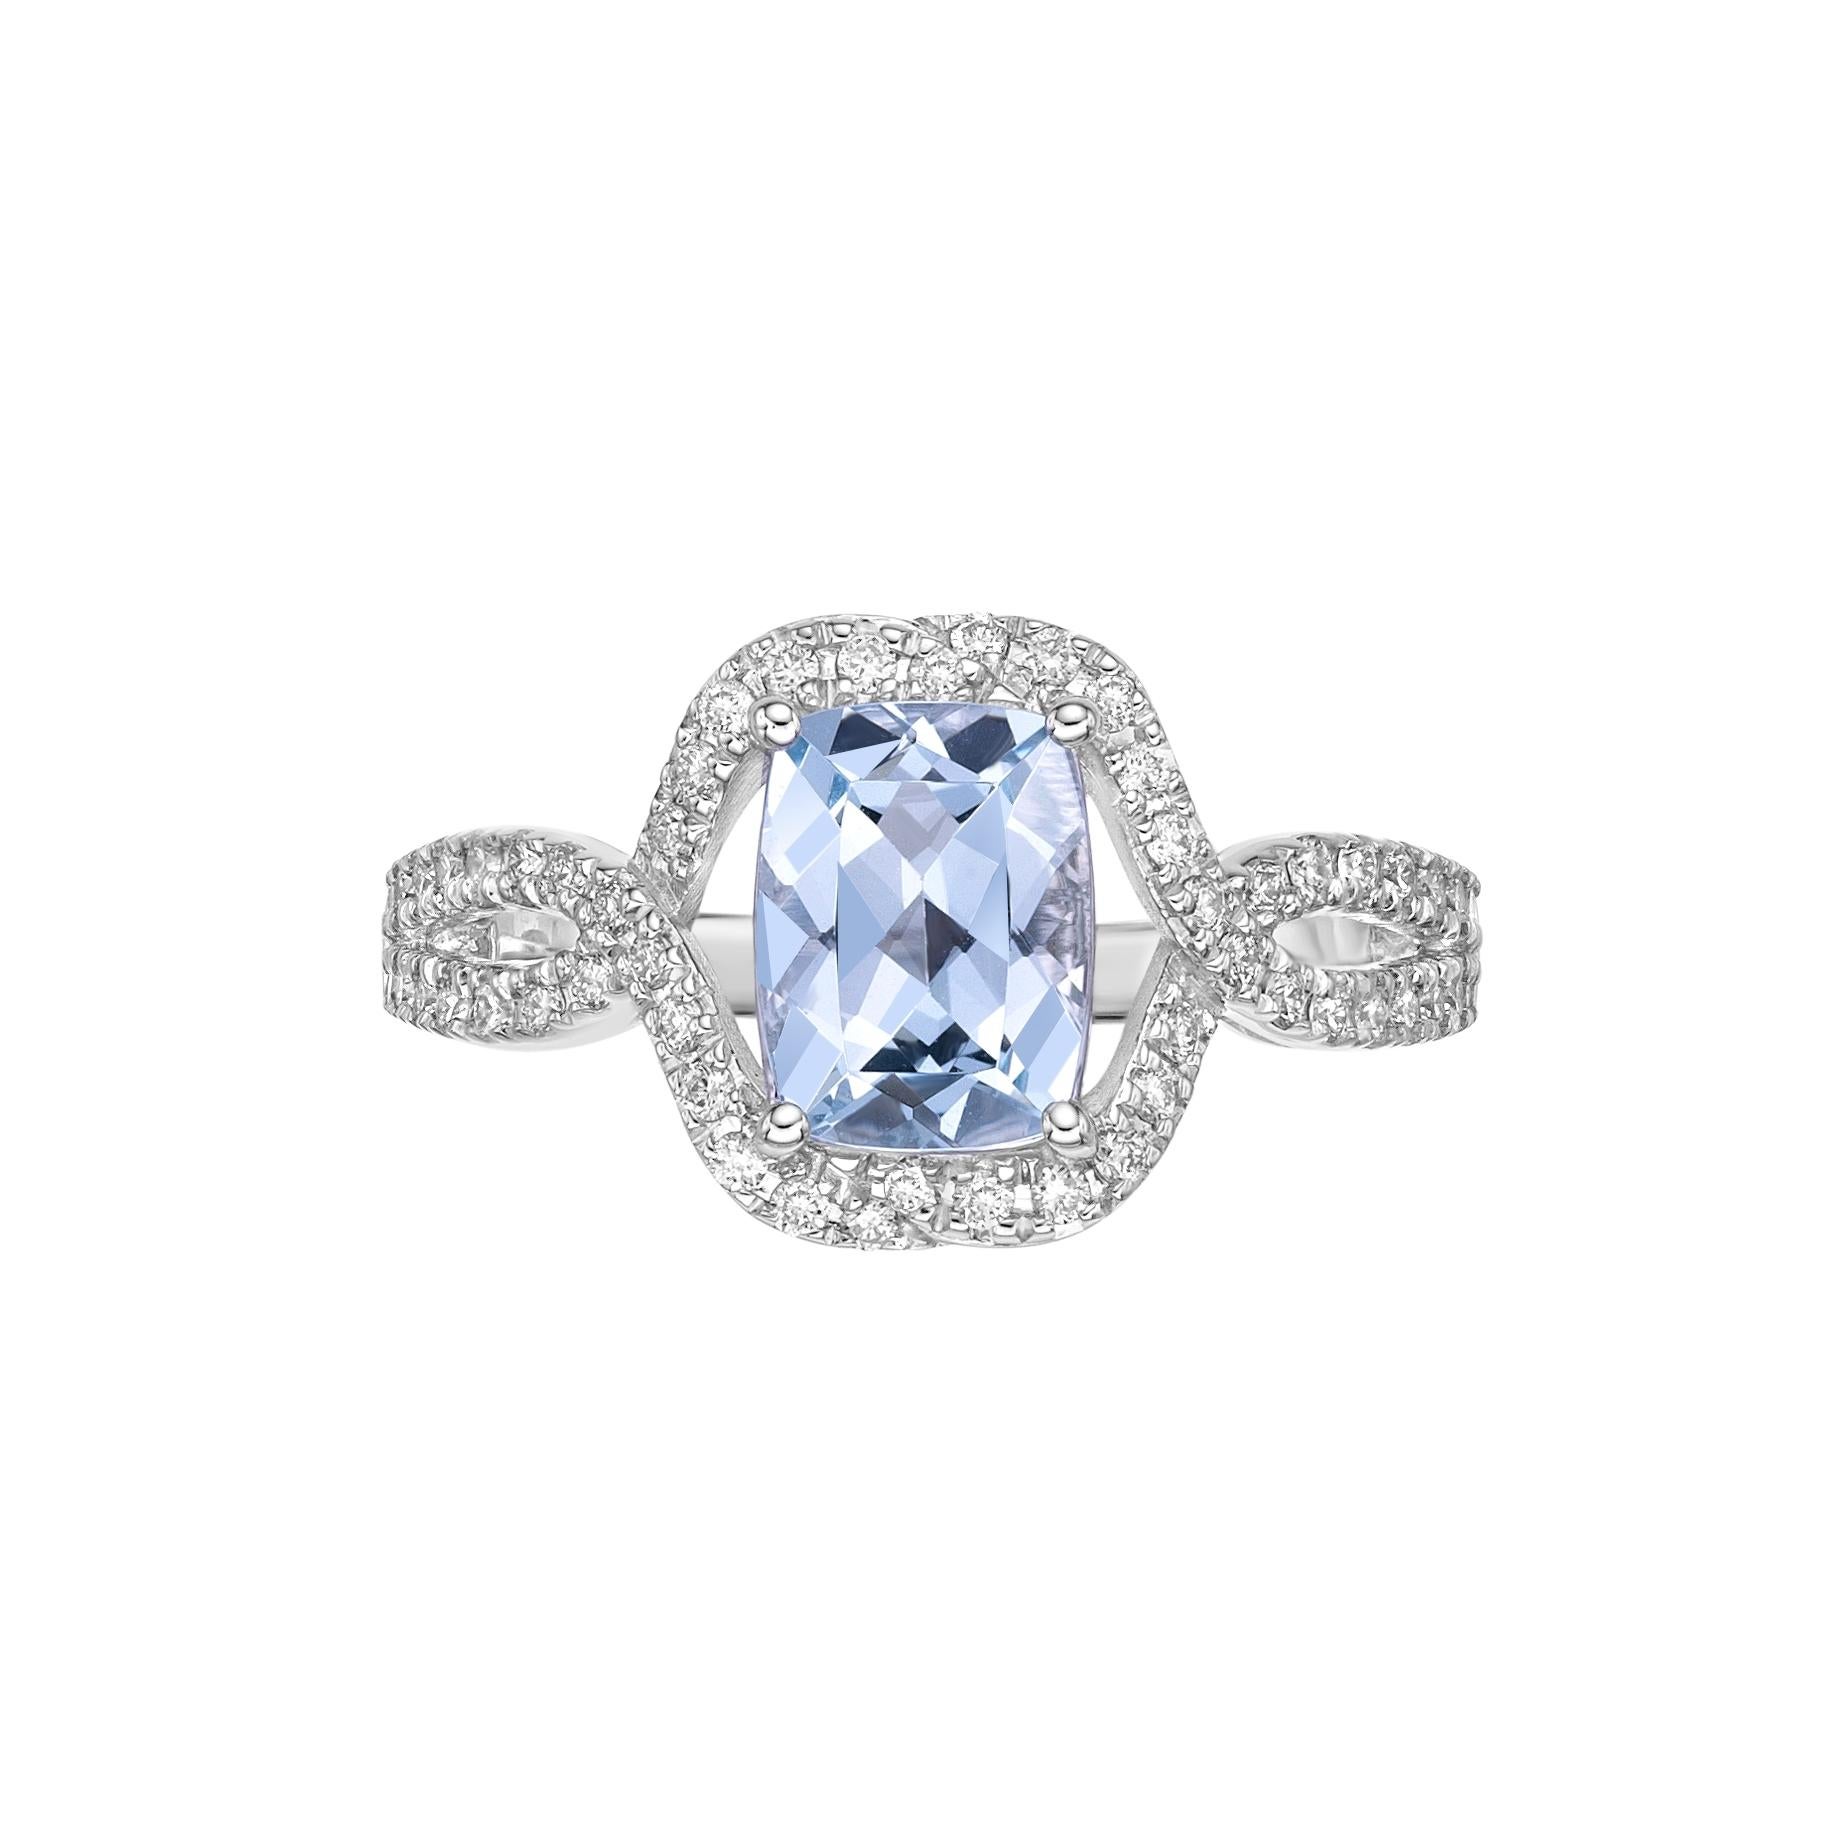 Contemporary 1.26 Carat Aquamarine Fancy Ring in 18Karat White Gold with White Diamond.   For Sale